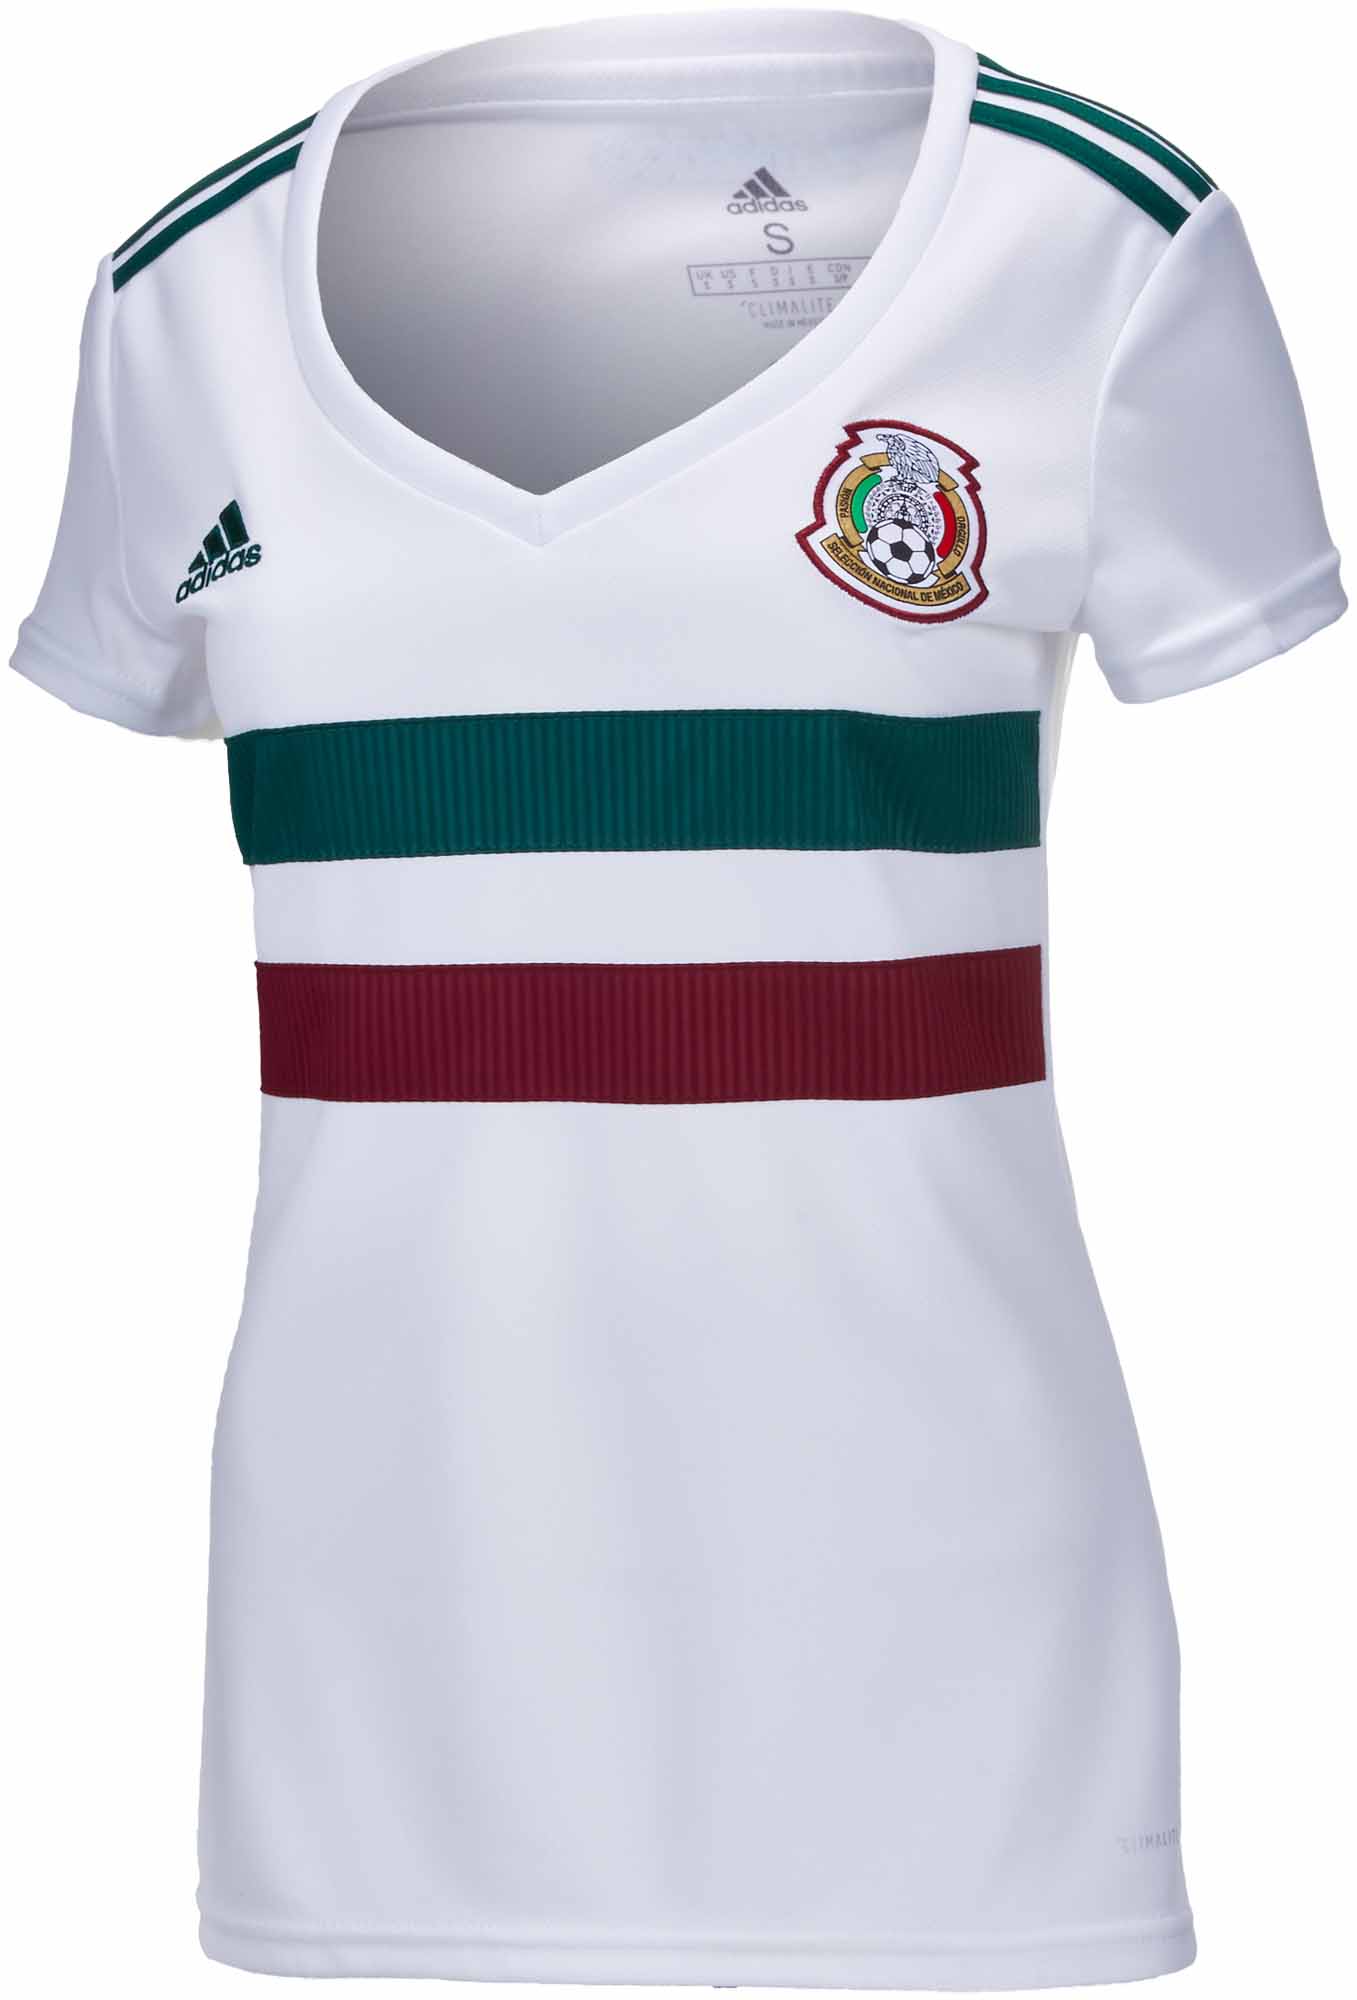 adidas jersey for ladies